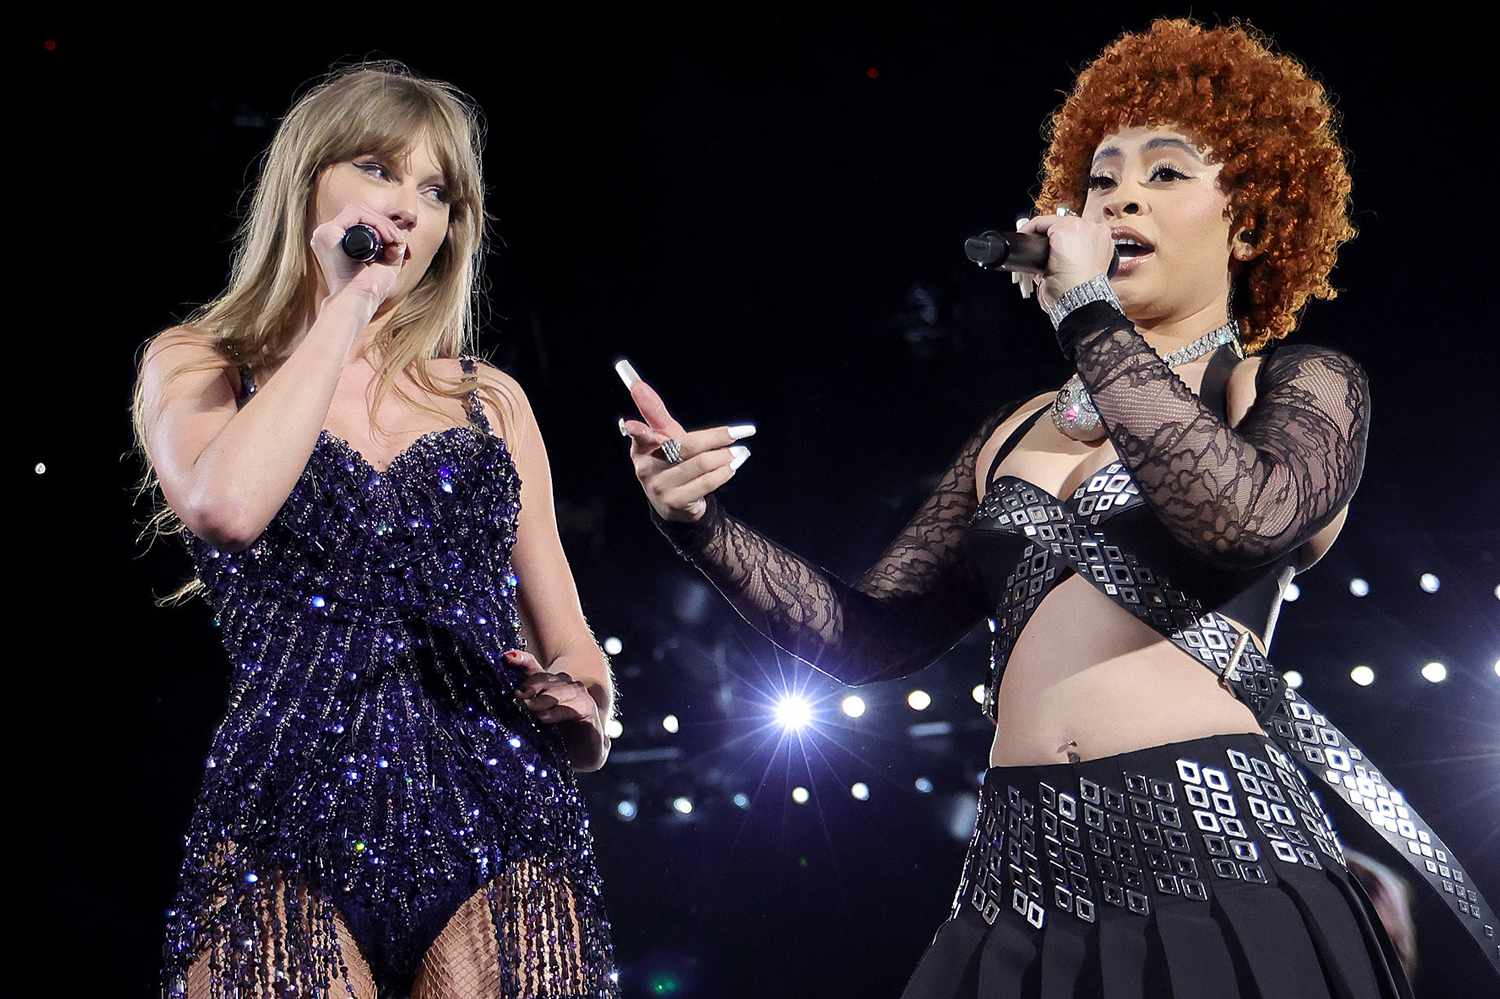 In an electrifying moment that left fans in awe, pop icon Taylor Swift was joined on stage by the legendary Ice Spice during her third night concert in Sydney